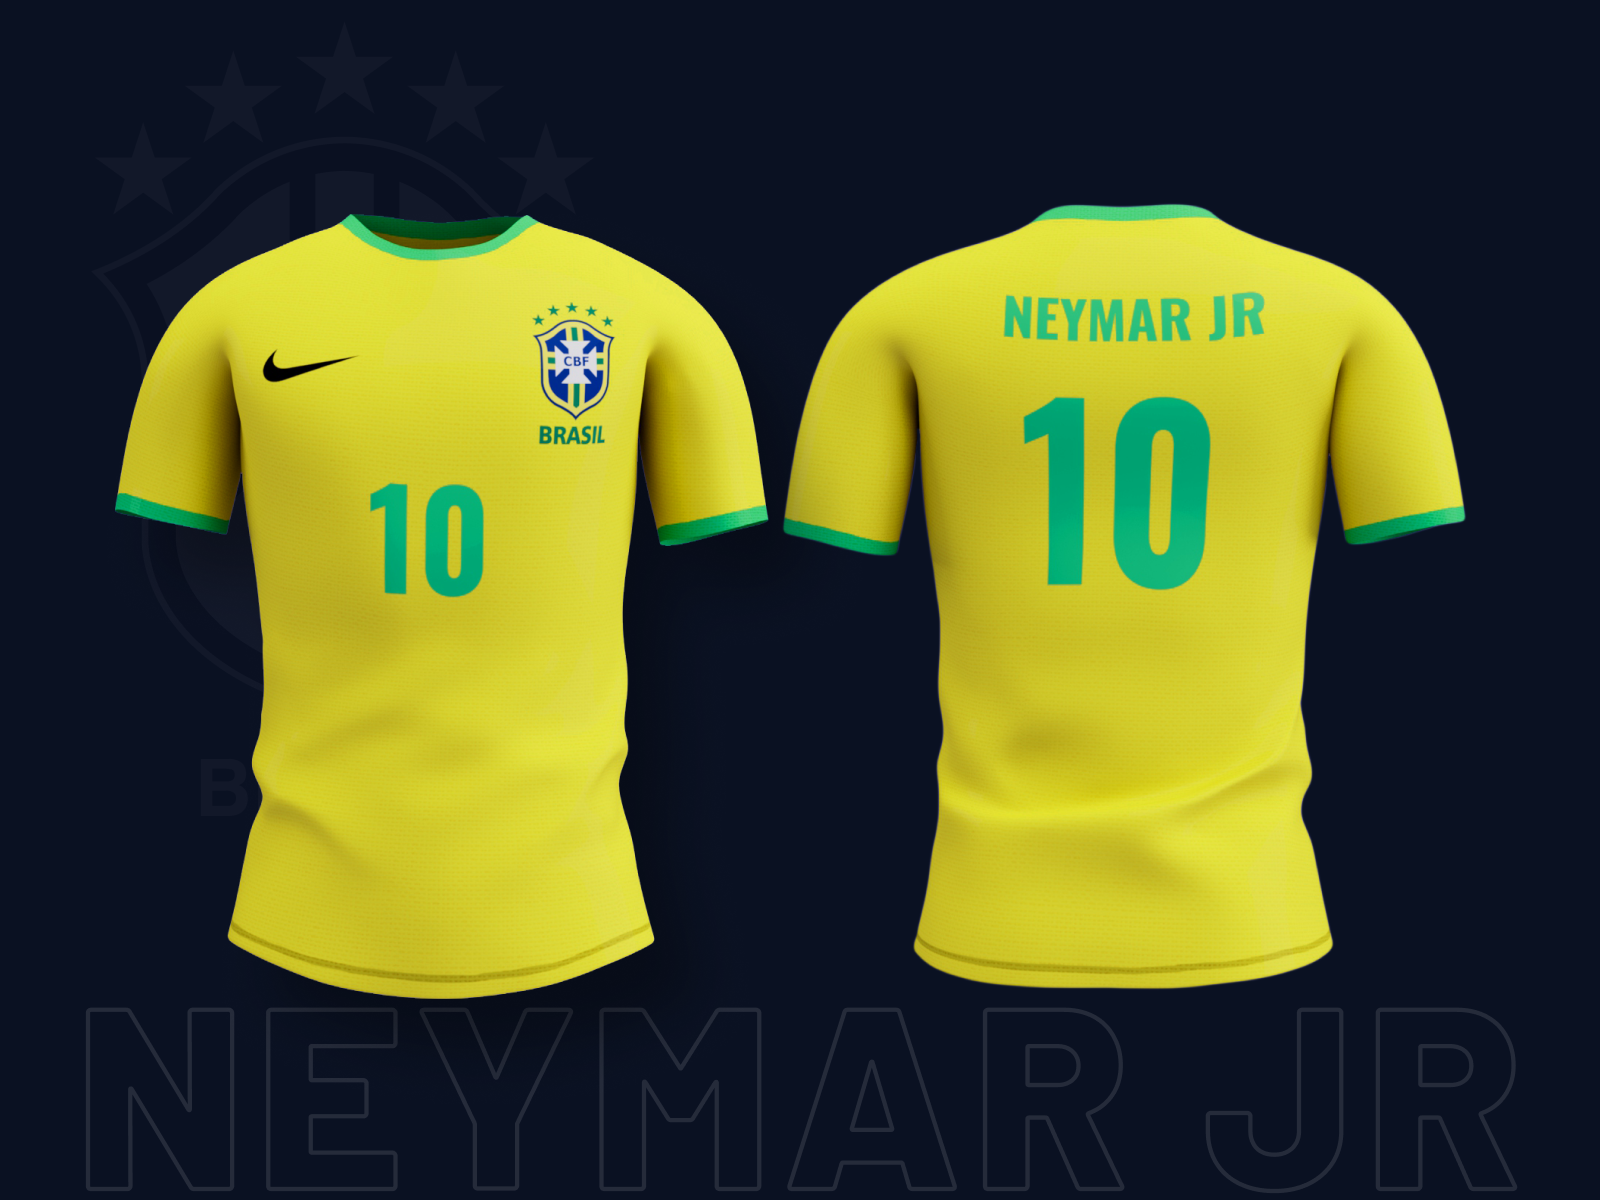 Brazil Team Jersey - FIFA World Cup Football Kit by MQoS UI/UX for